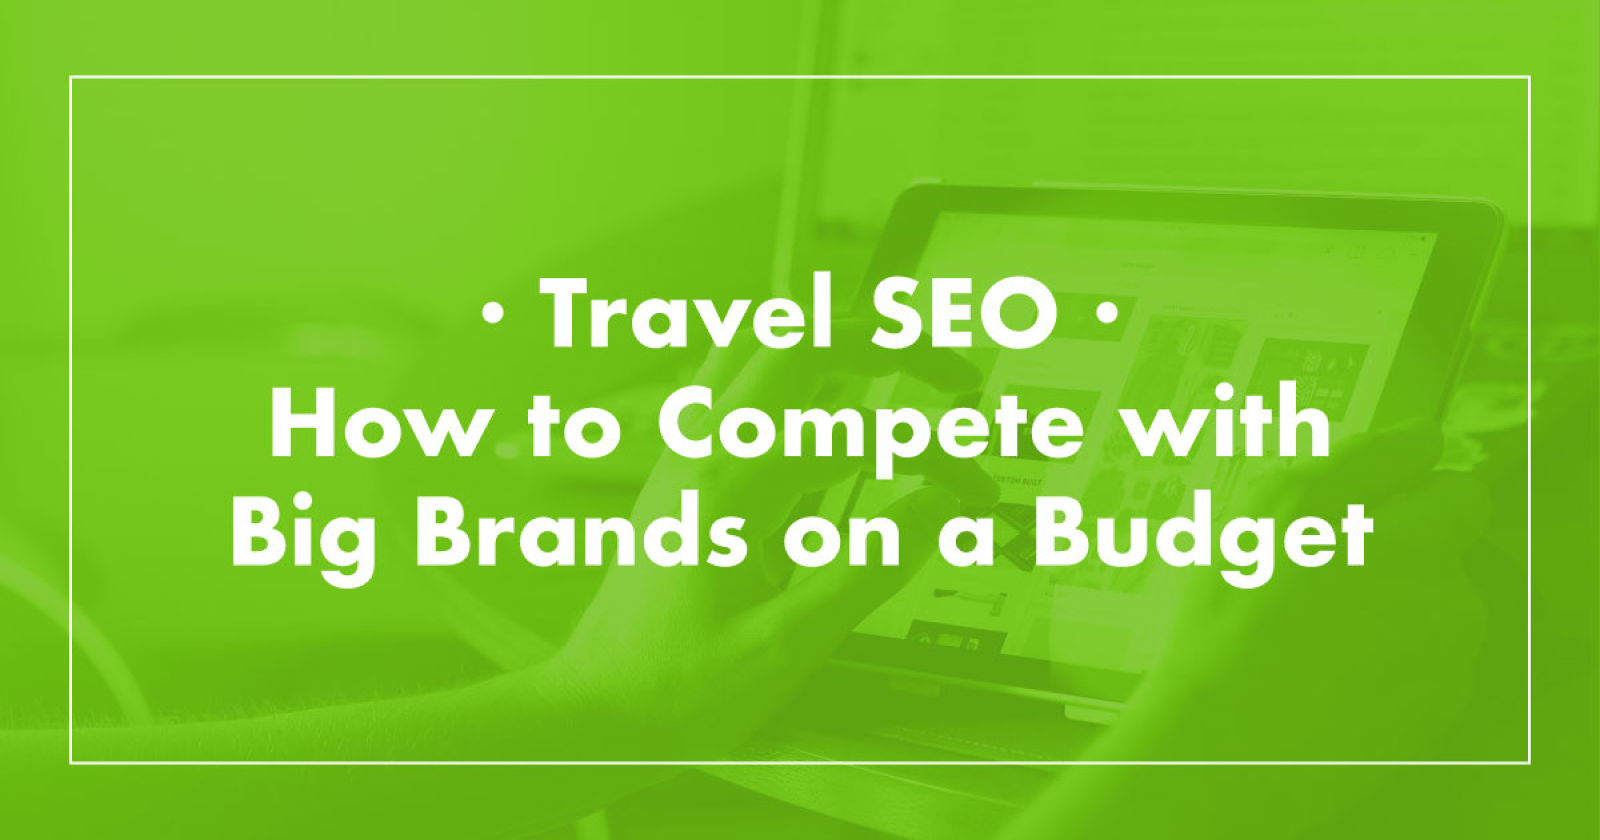 Travel Content SEO Strategy: How To Build Links, Traffic & Conversions